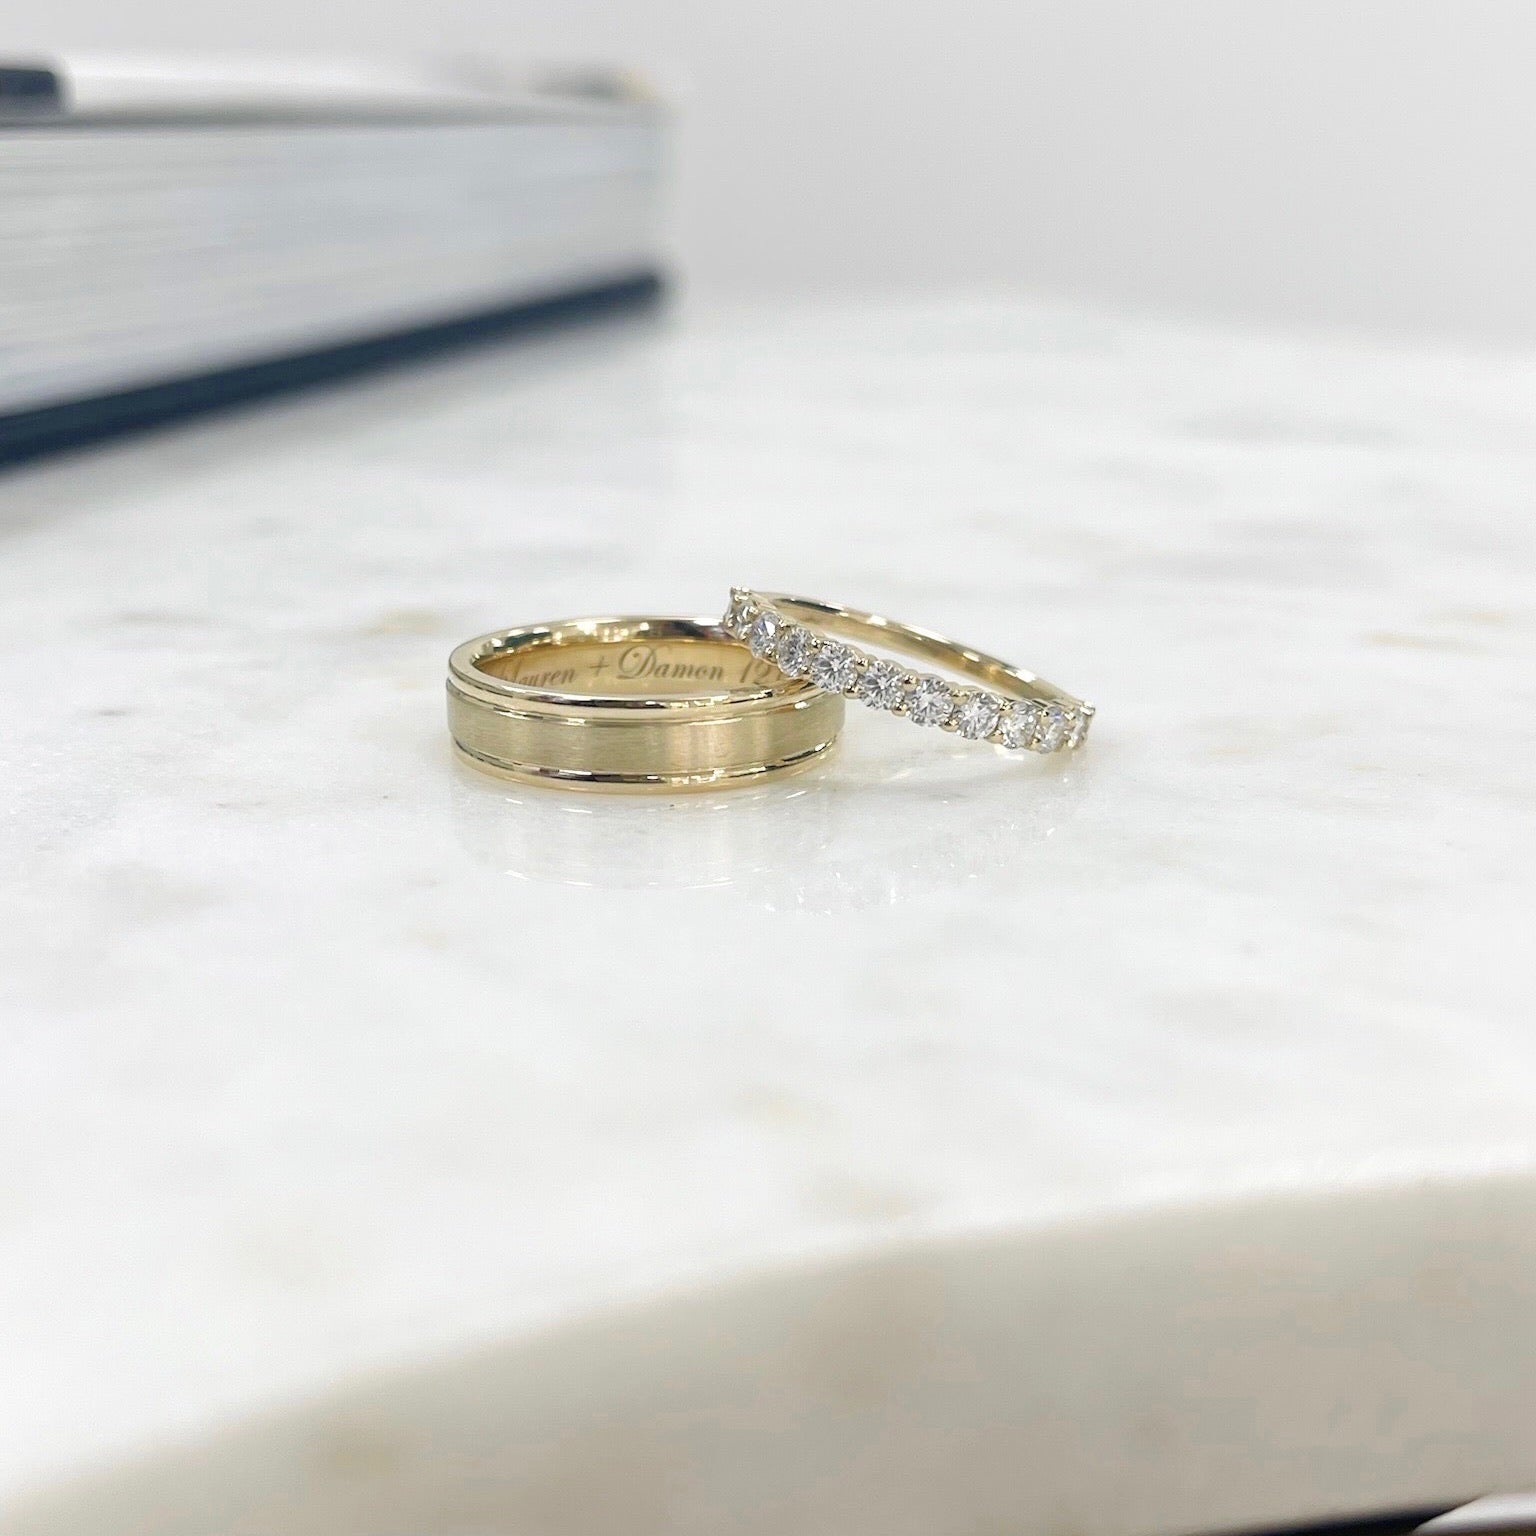 Wedding rings sets for him and her